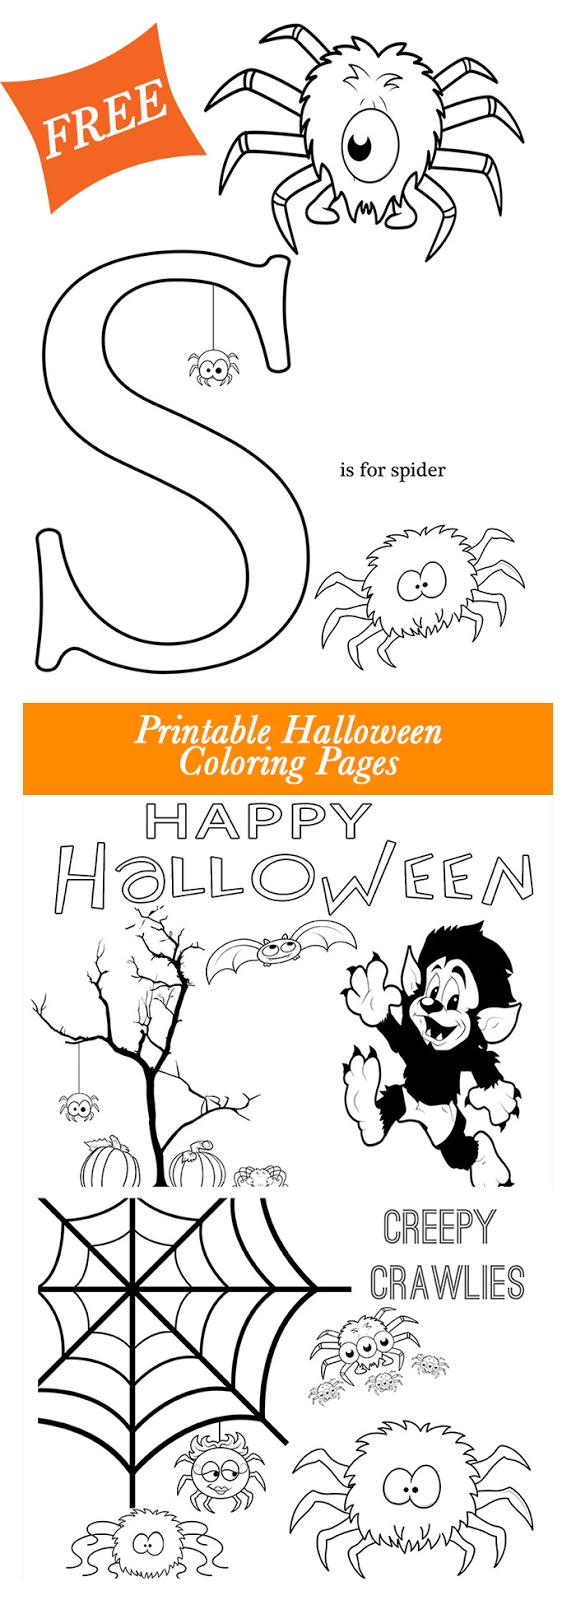 Get these free Halloween Printable coloring pages from Major Hoff Takes A Wife. Super cute pages feature friendly spiders, the letter S and a few other Halloween themed items. Enjoy!